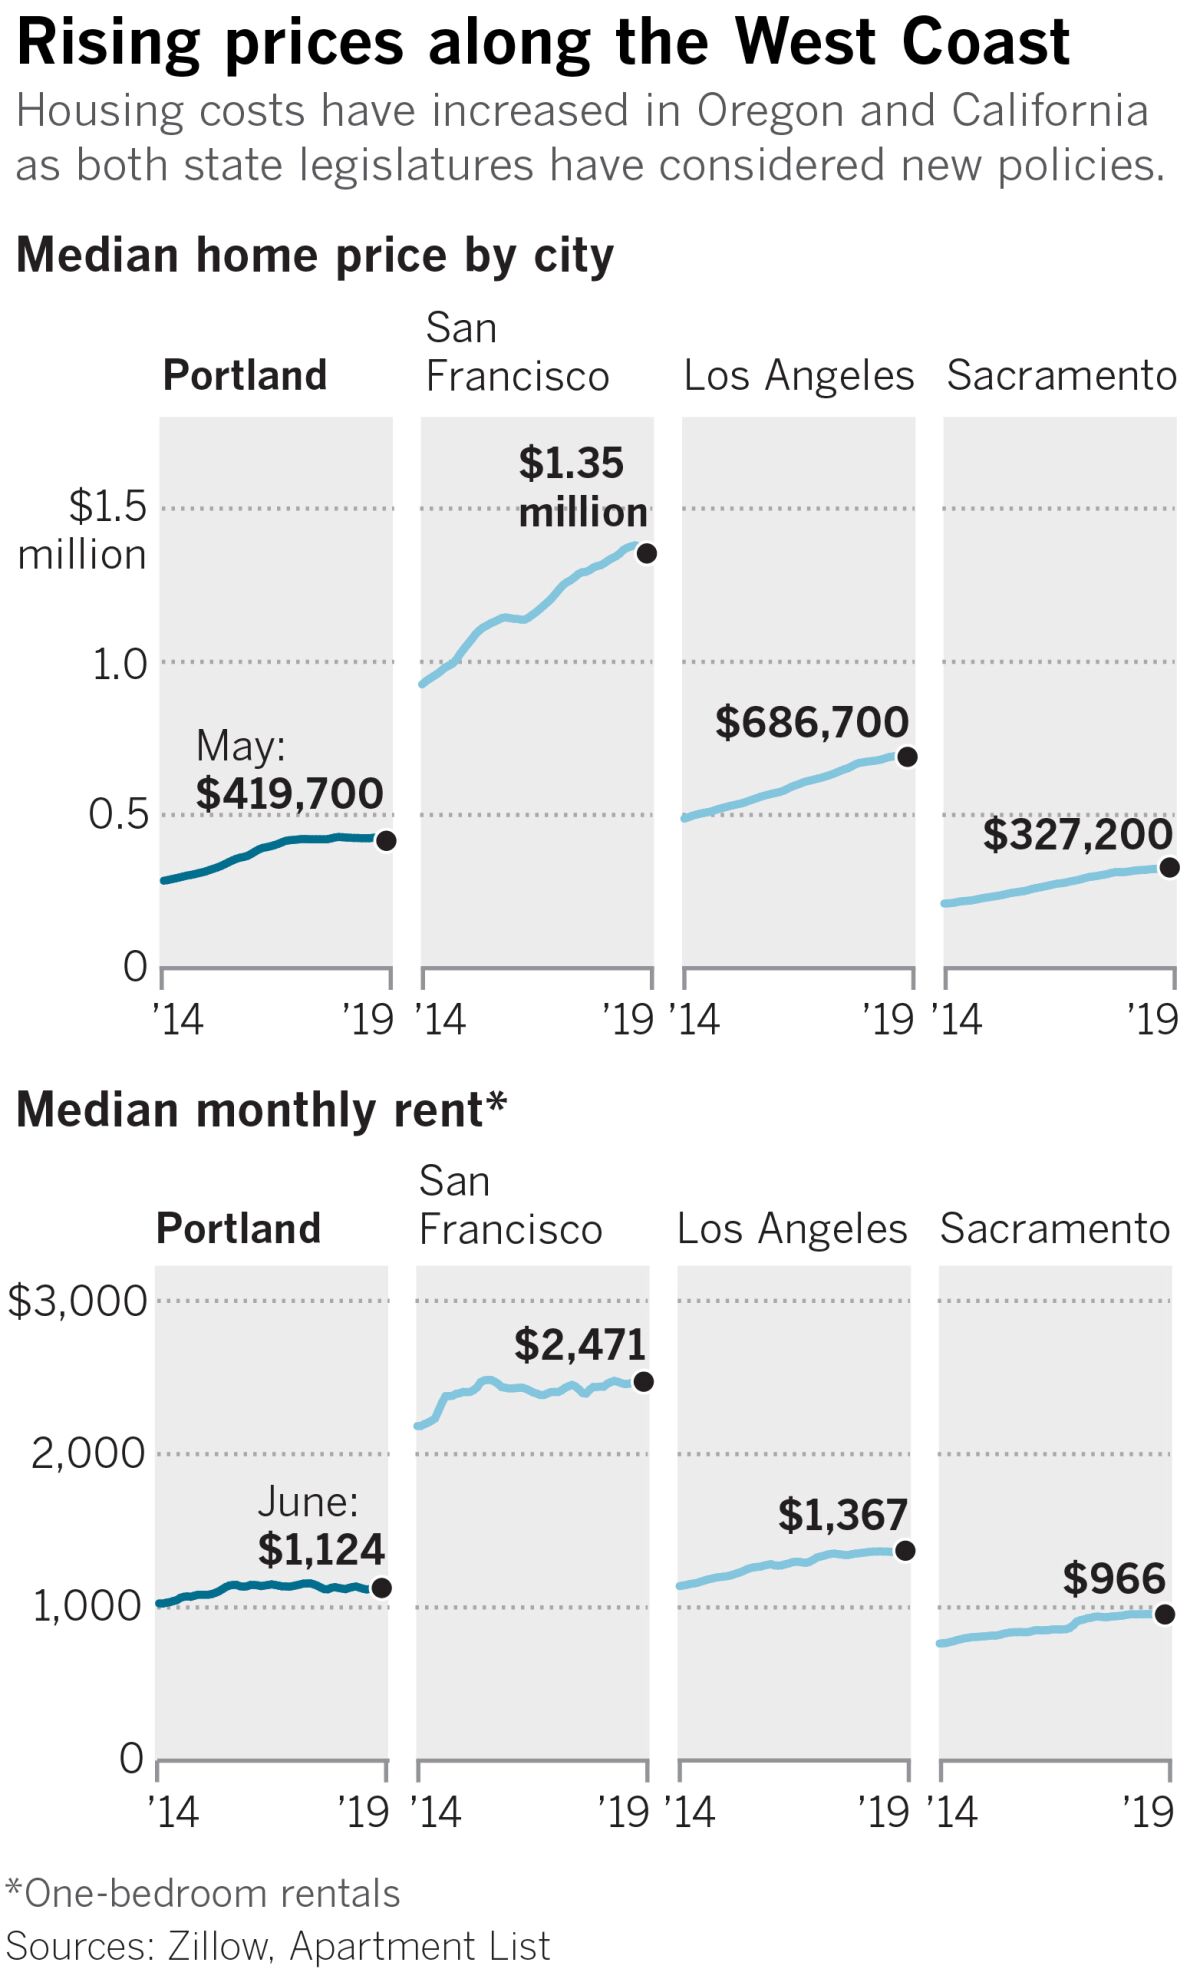 Housing costs have increased in Oregon and California as both state legislatures have considered new policies.